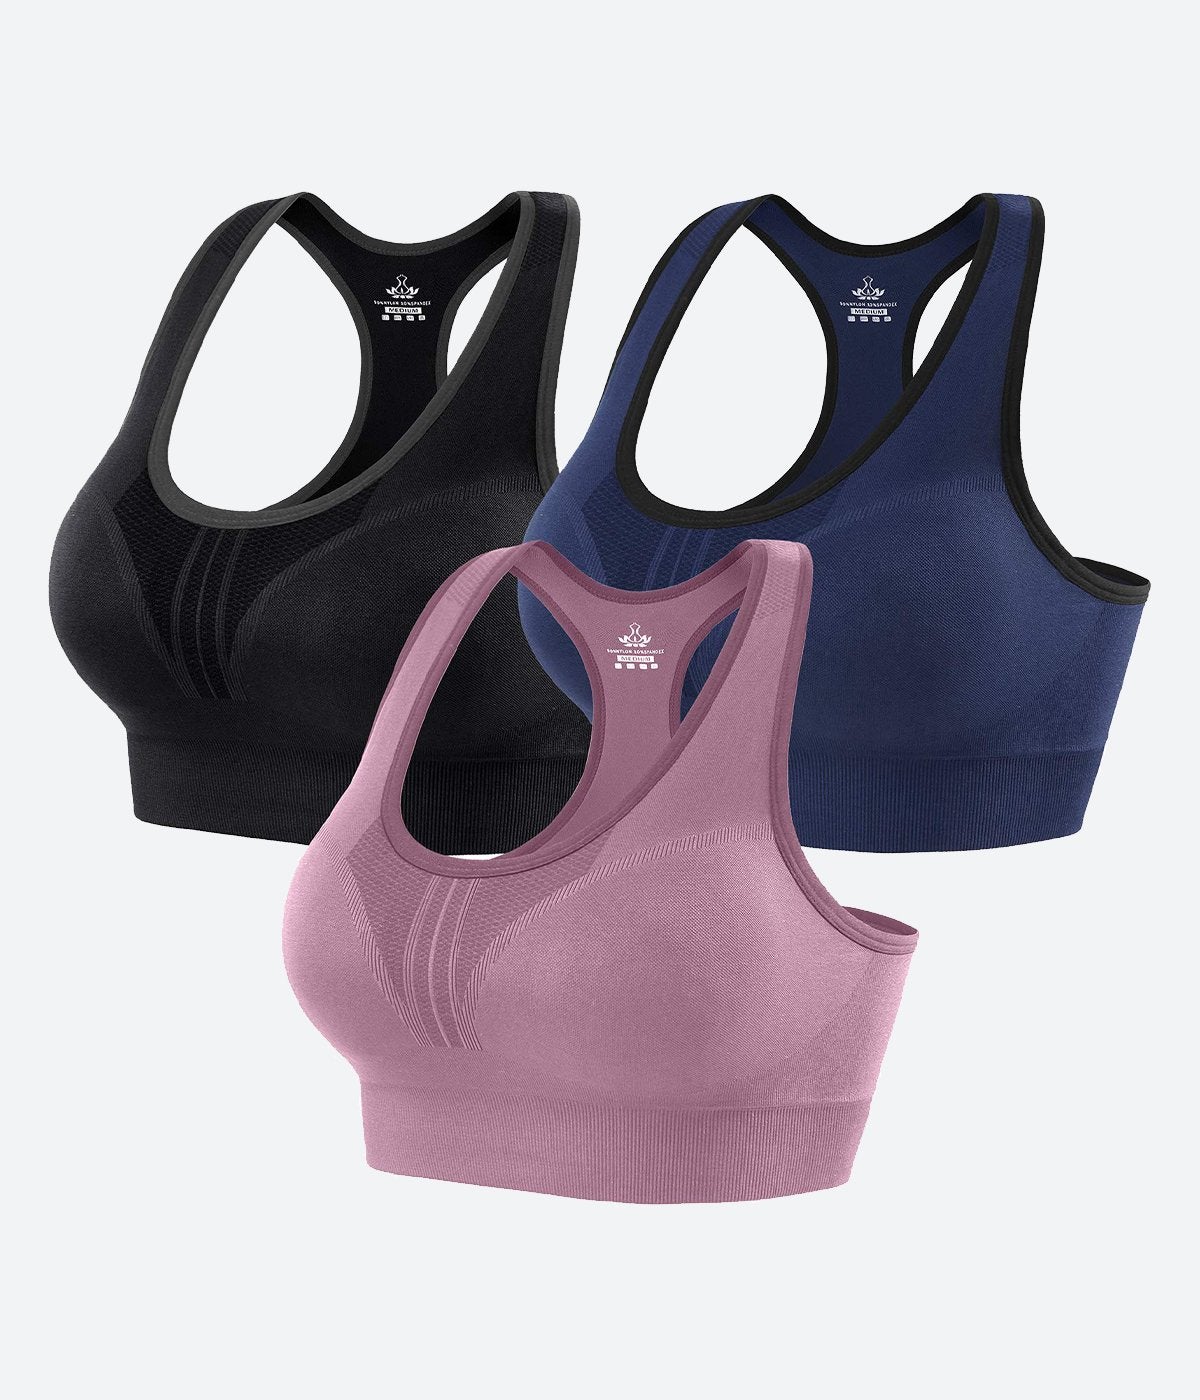 DISOLVE Racerback Sports Bra for Women - Comfortable Sleep Bra Seamless  Workout Yoga Bra Size (28 Till 34) Pack of 1 Peach Color